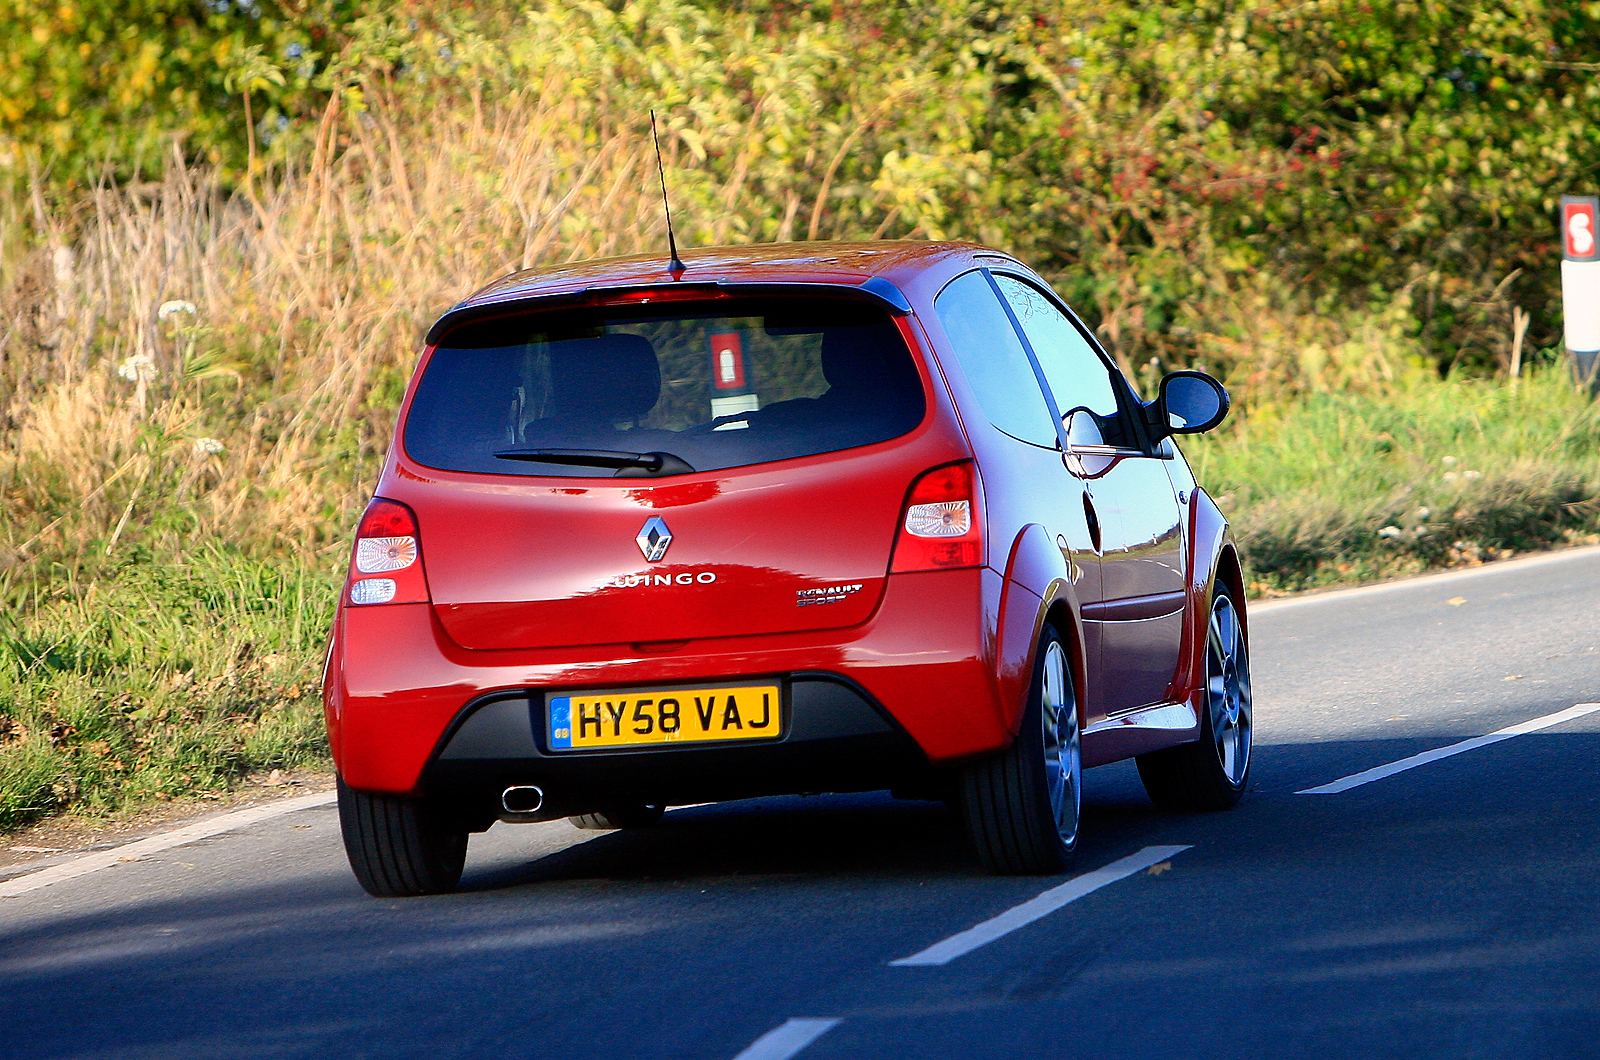 Reanult Twingo RS133 rear end